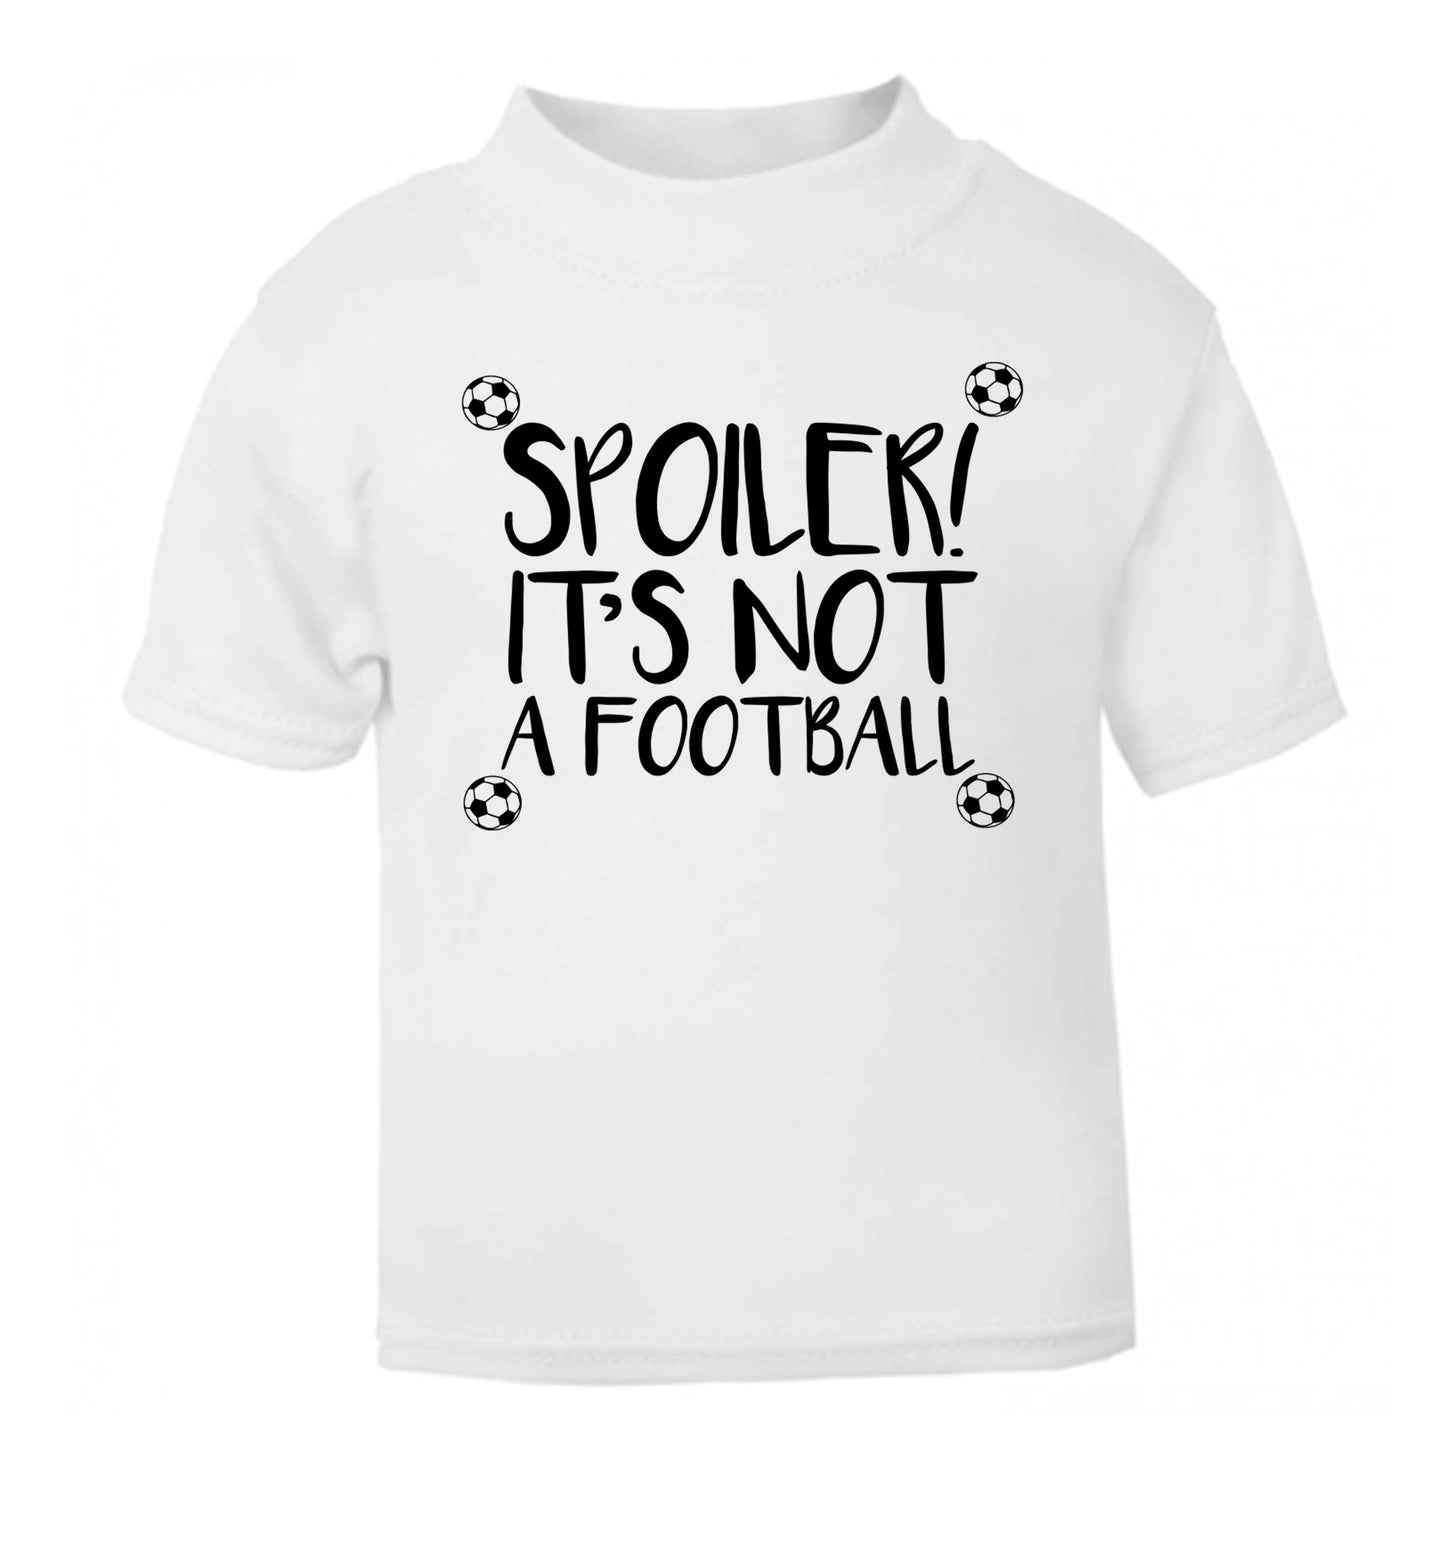 Spoiler it's not a football white Baby Toddler Tshirt 2 Years